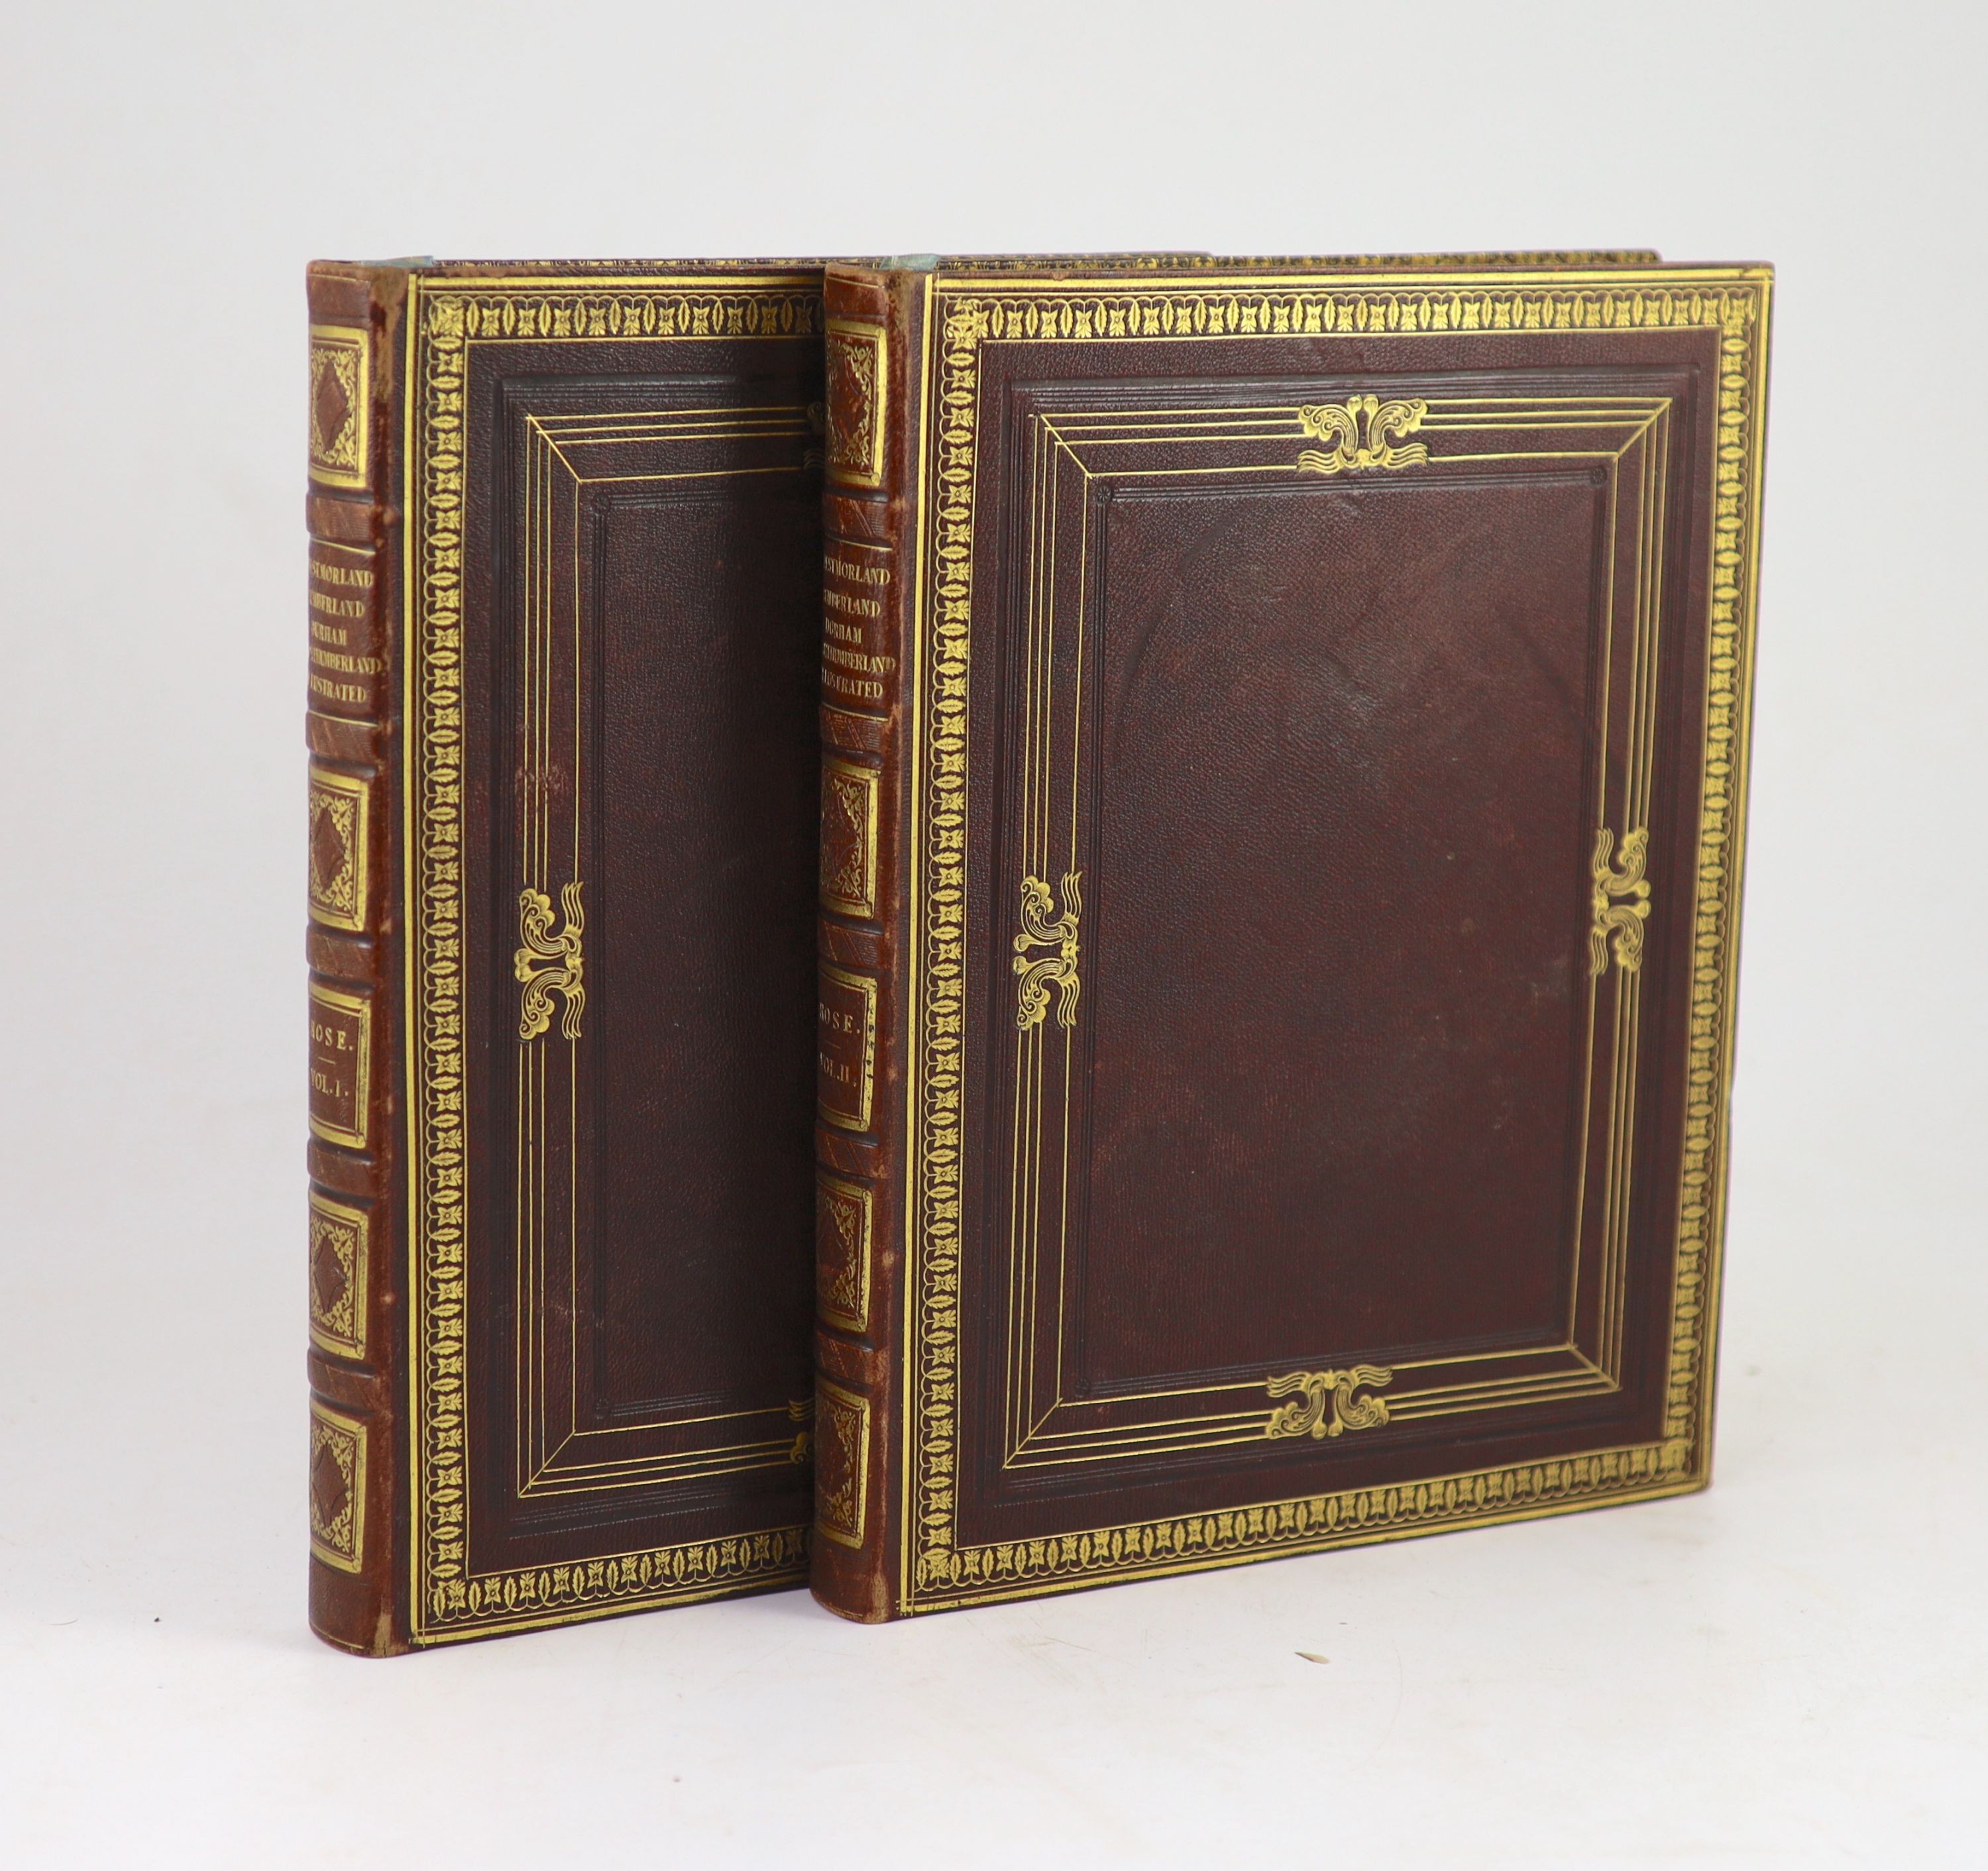 Rose, Thomas - Westmorland, Cumberland, Durham, and Northumberland, Illustrated from Original Drawings by Thomas Allom, George Pickering. 2 vols. Complete 215 plates (some with guards). Pebbled Morocco, gilt ruled and de